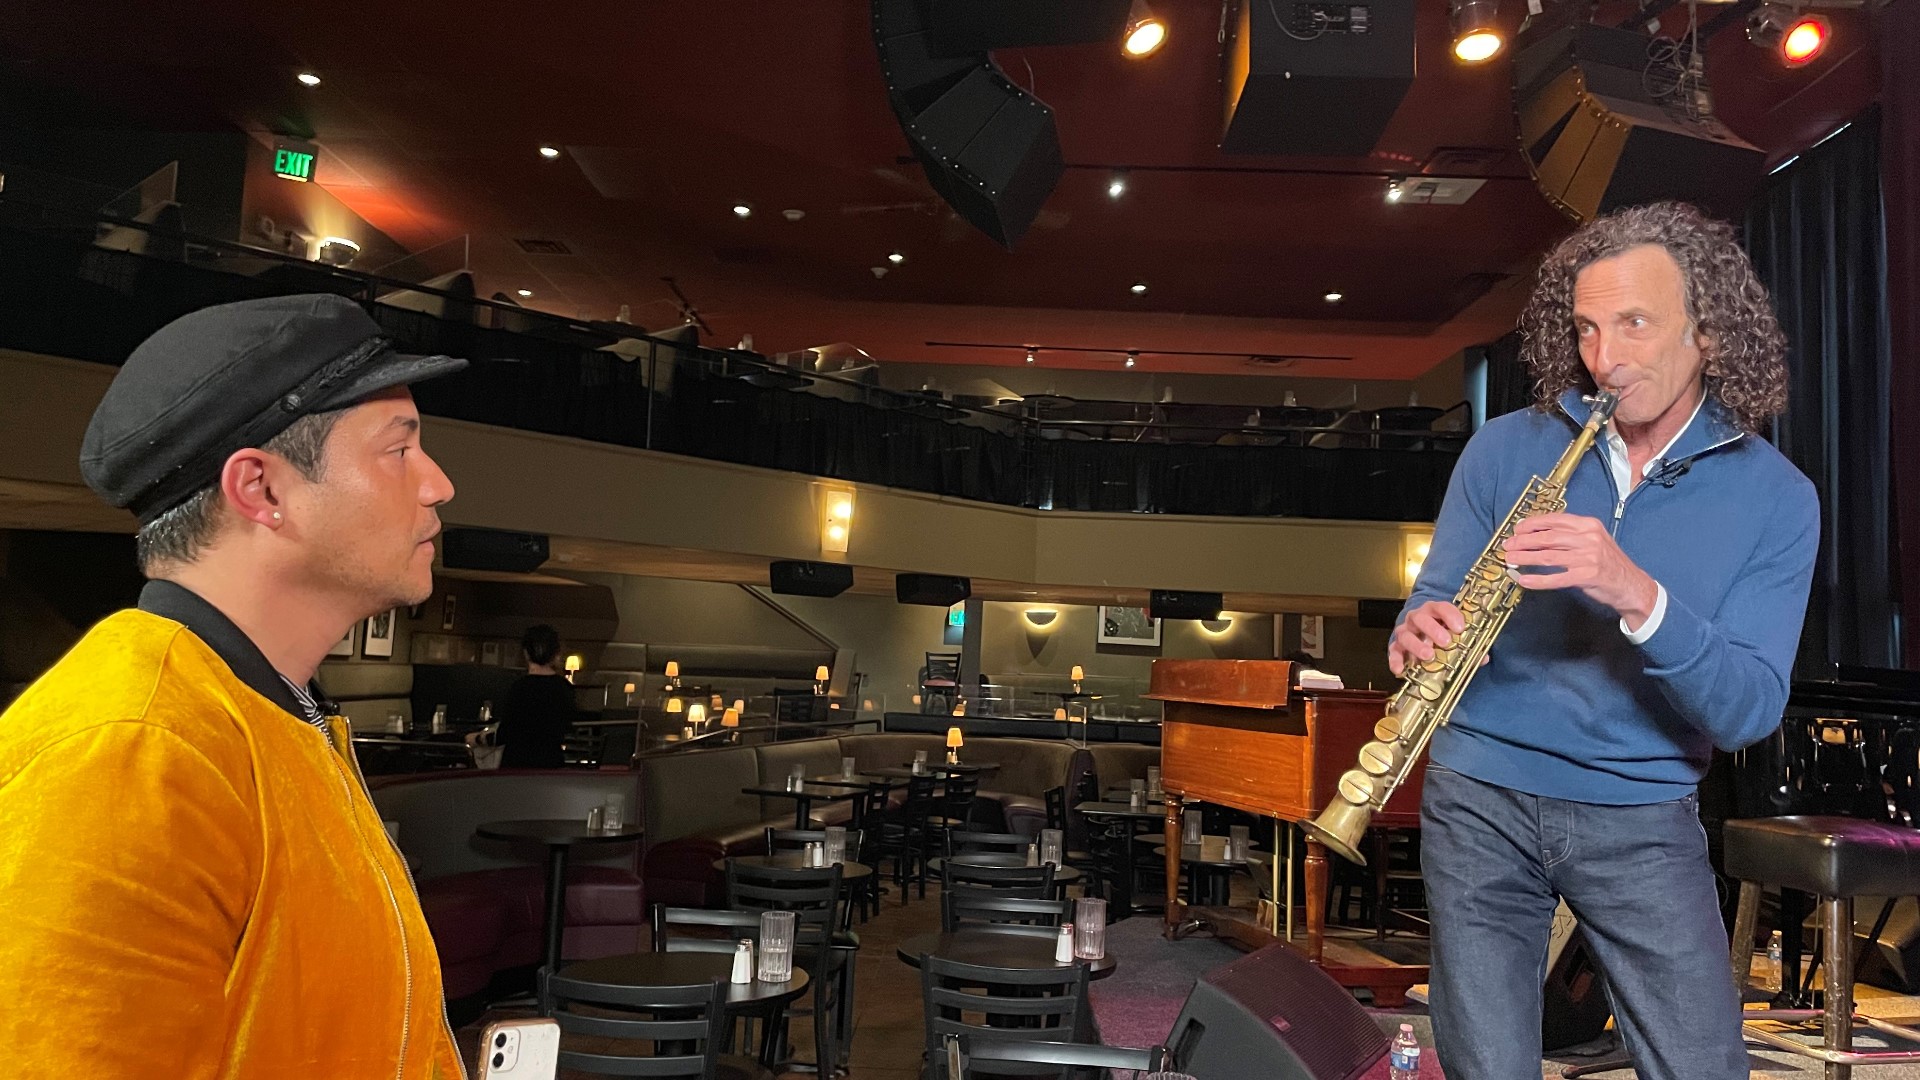 Jose Cedeno talks with sax icon about fave songs, hard work, and The Weeknd. #k5evening